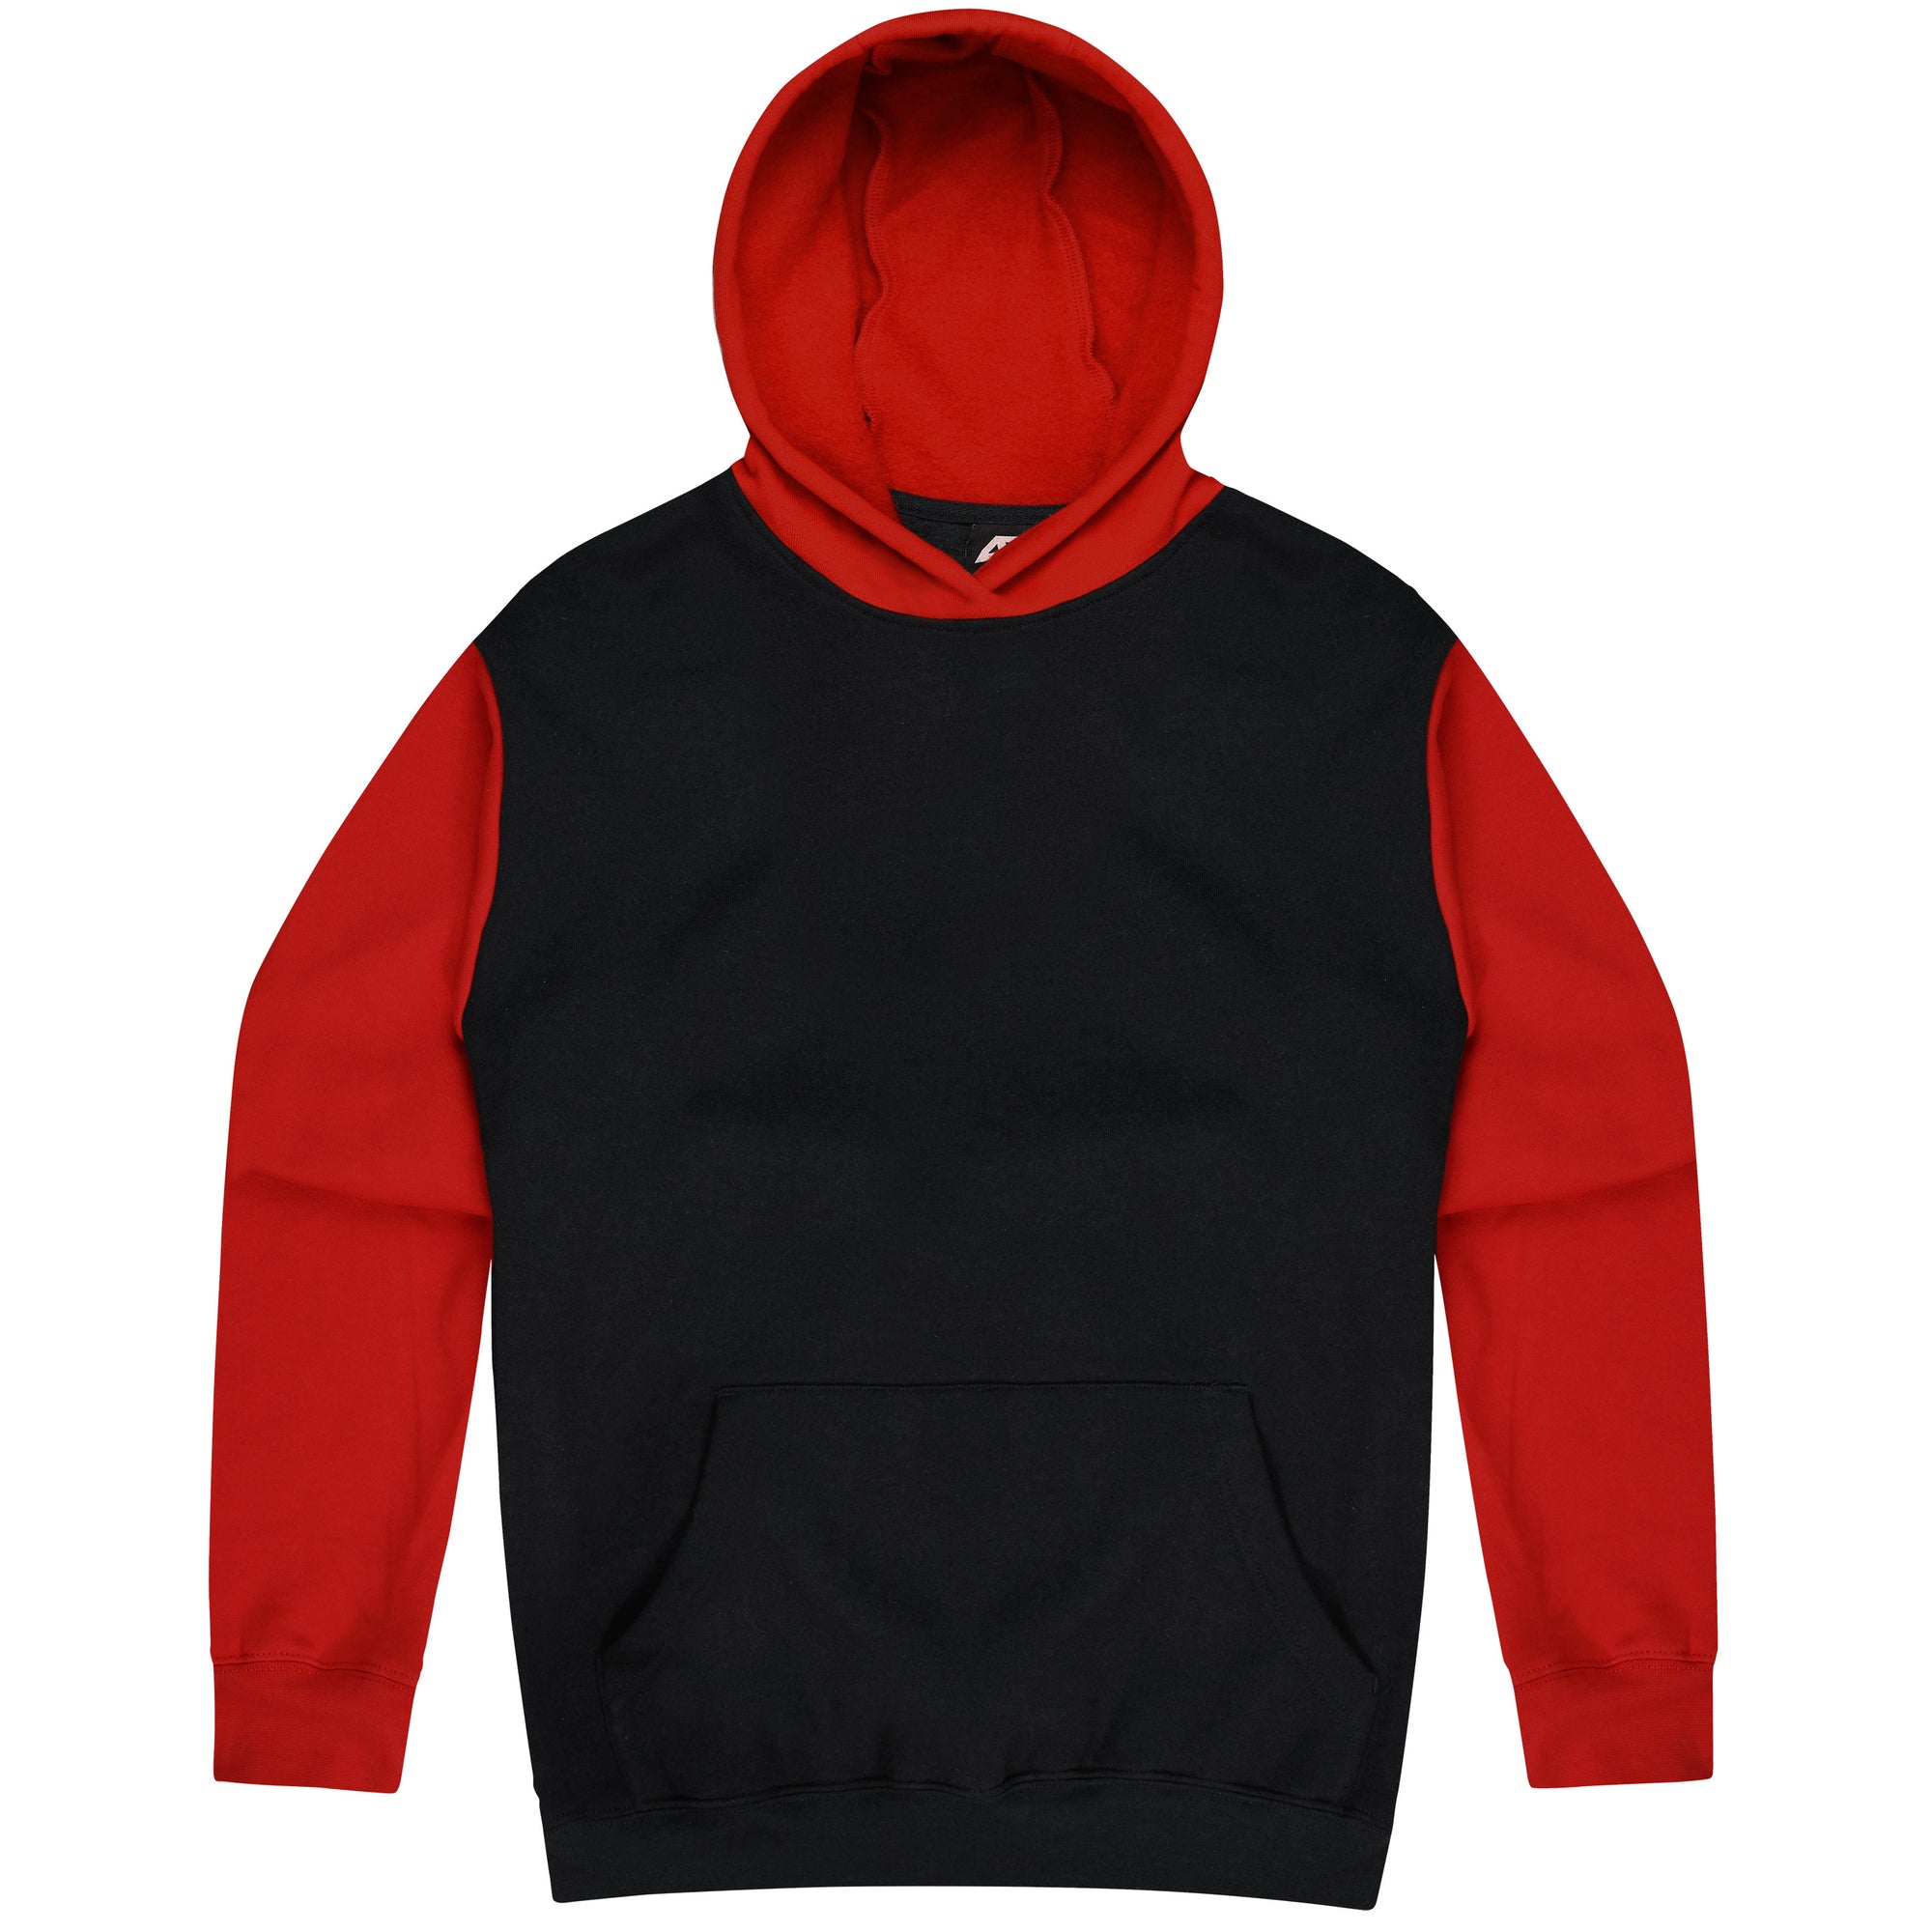 4 Pack Embroidered Monash Hoodies Special | Mens & Kids